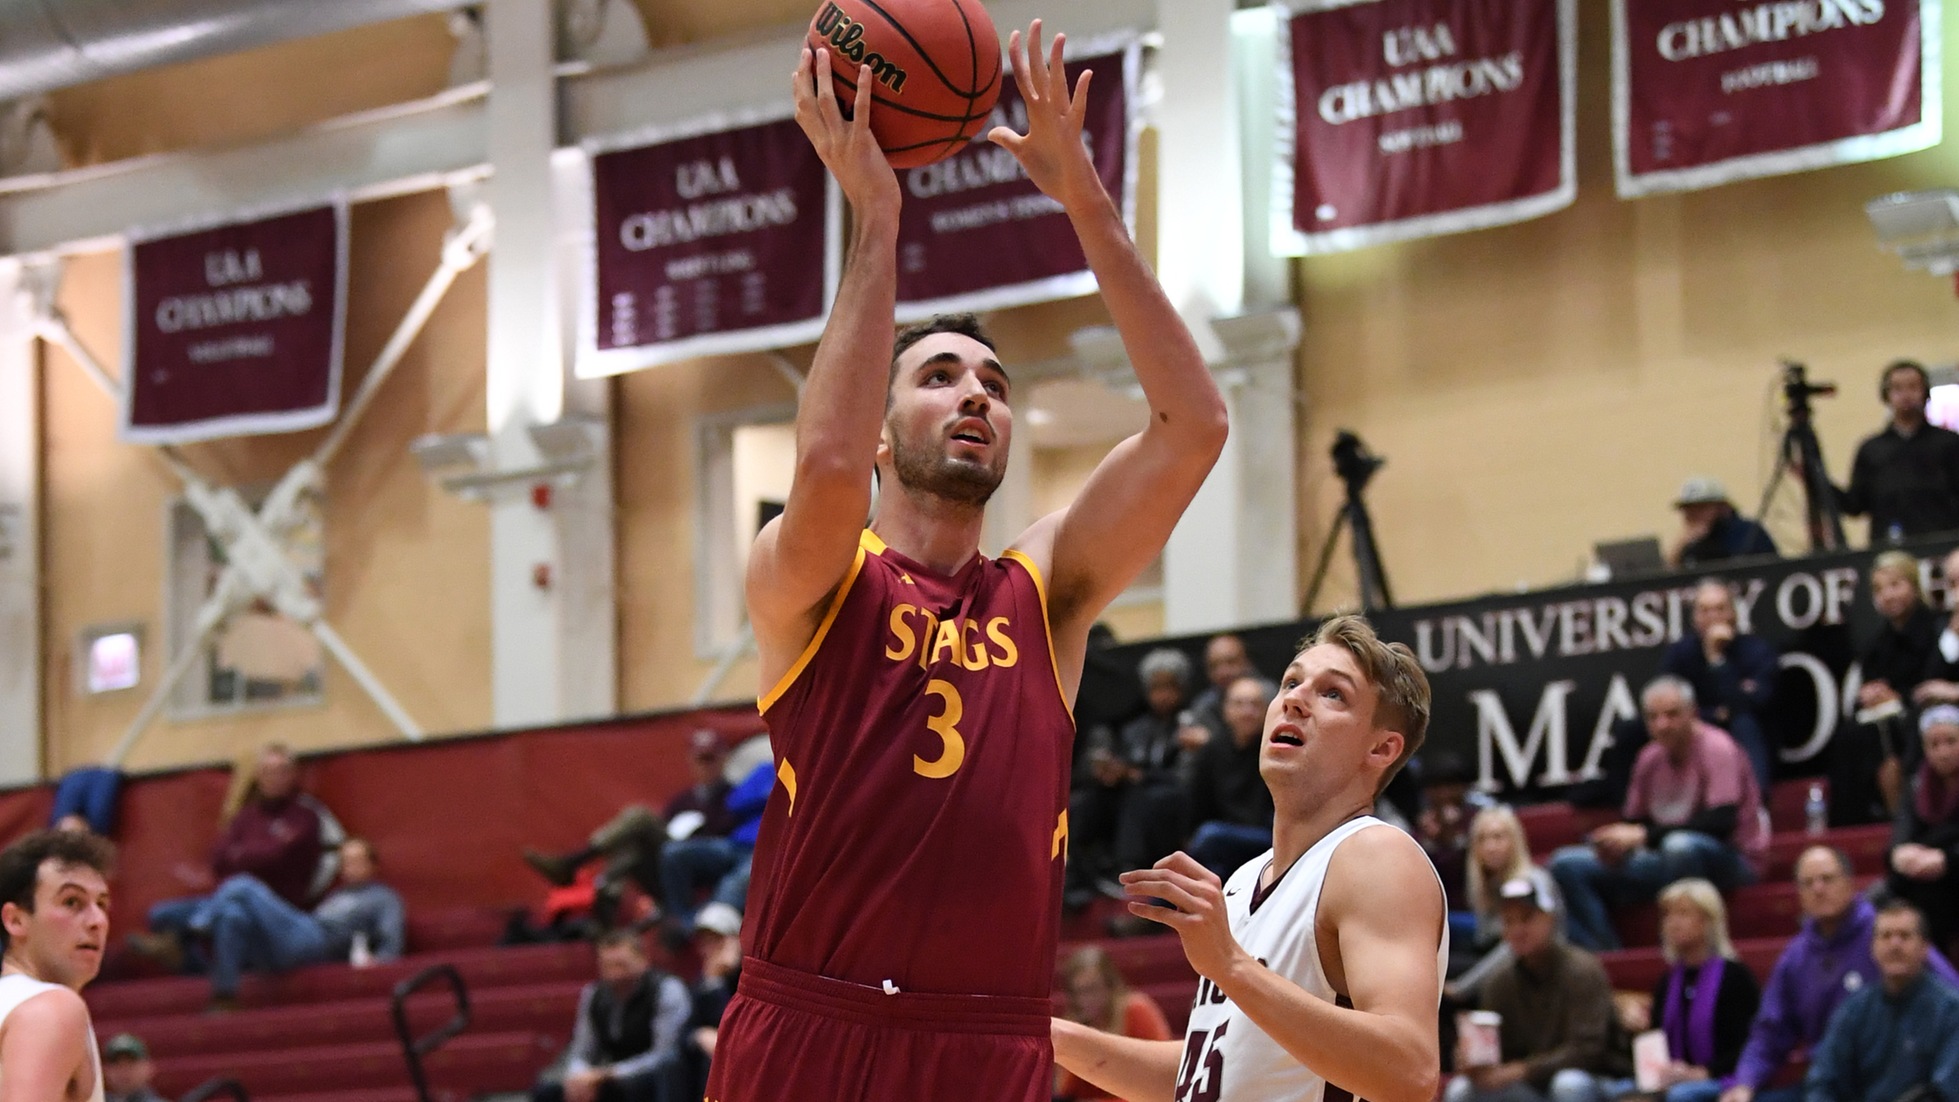 Big First-Half Run Carries CMS Men's Basketball to 85-64 Win over Springfield